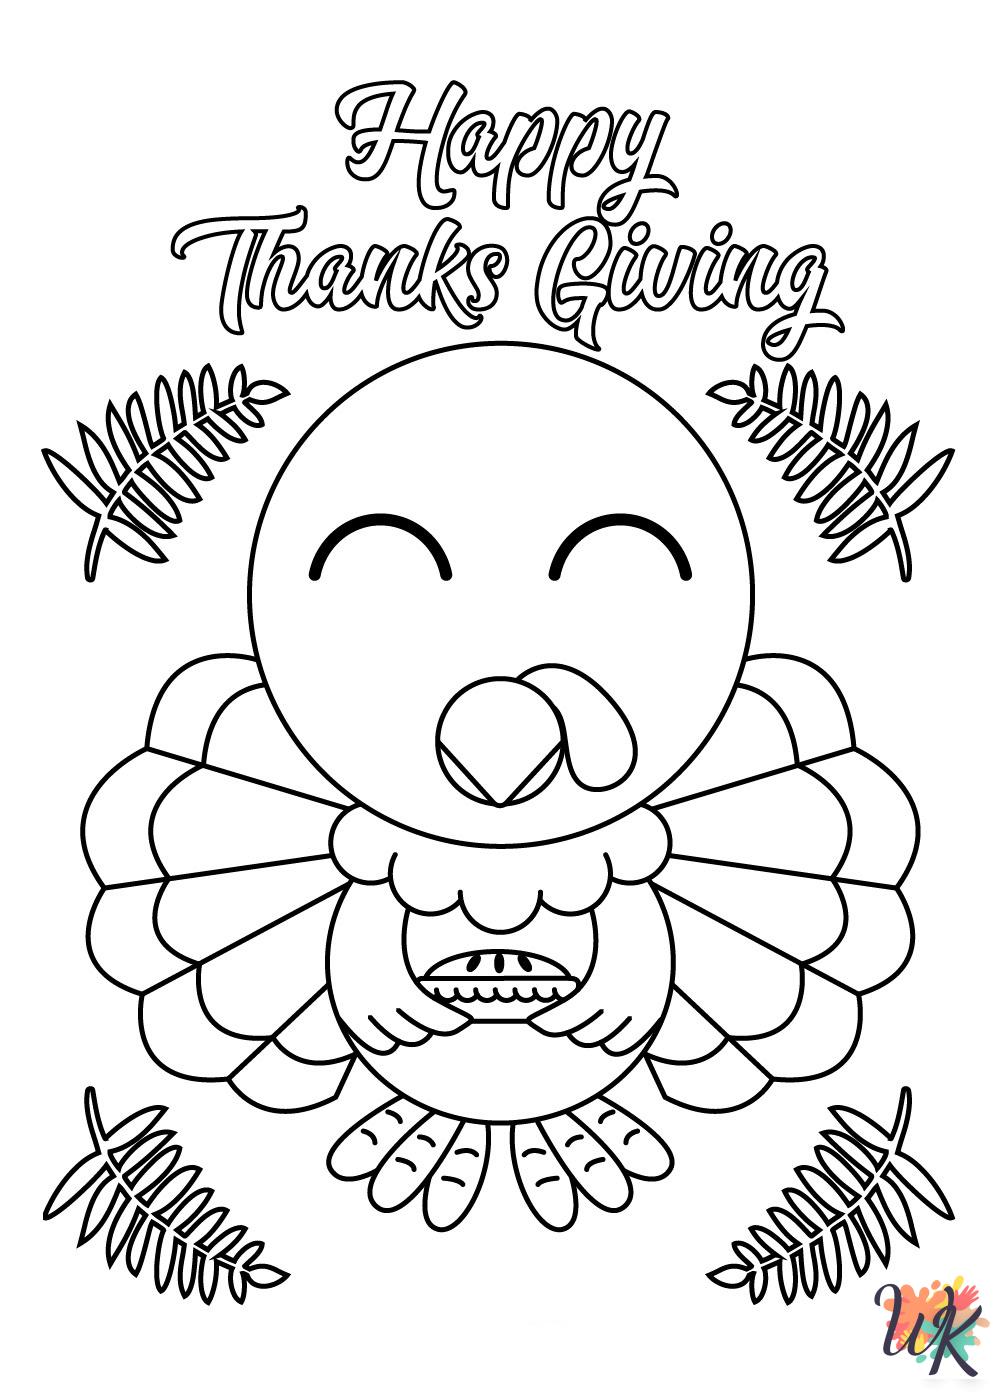 Thanksgiving coloring book pages